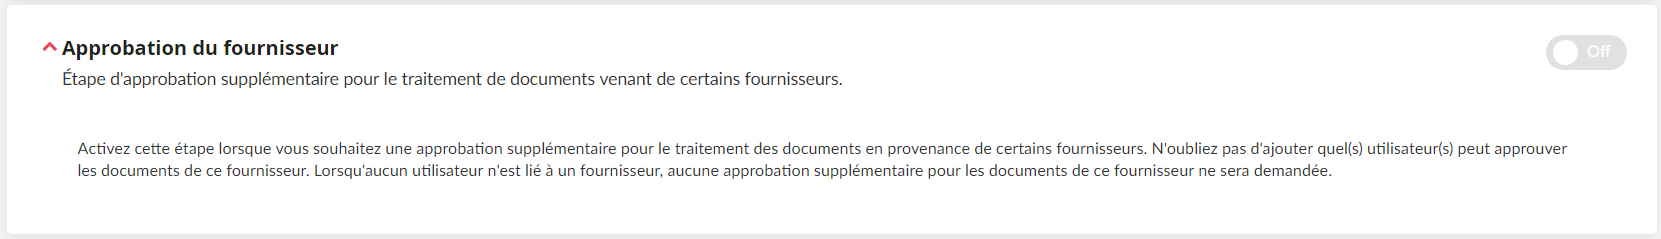 147-approuver-fournisseur.png